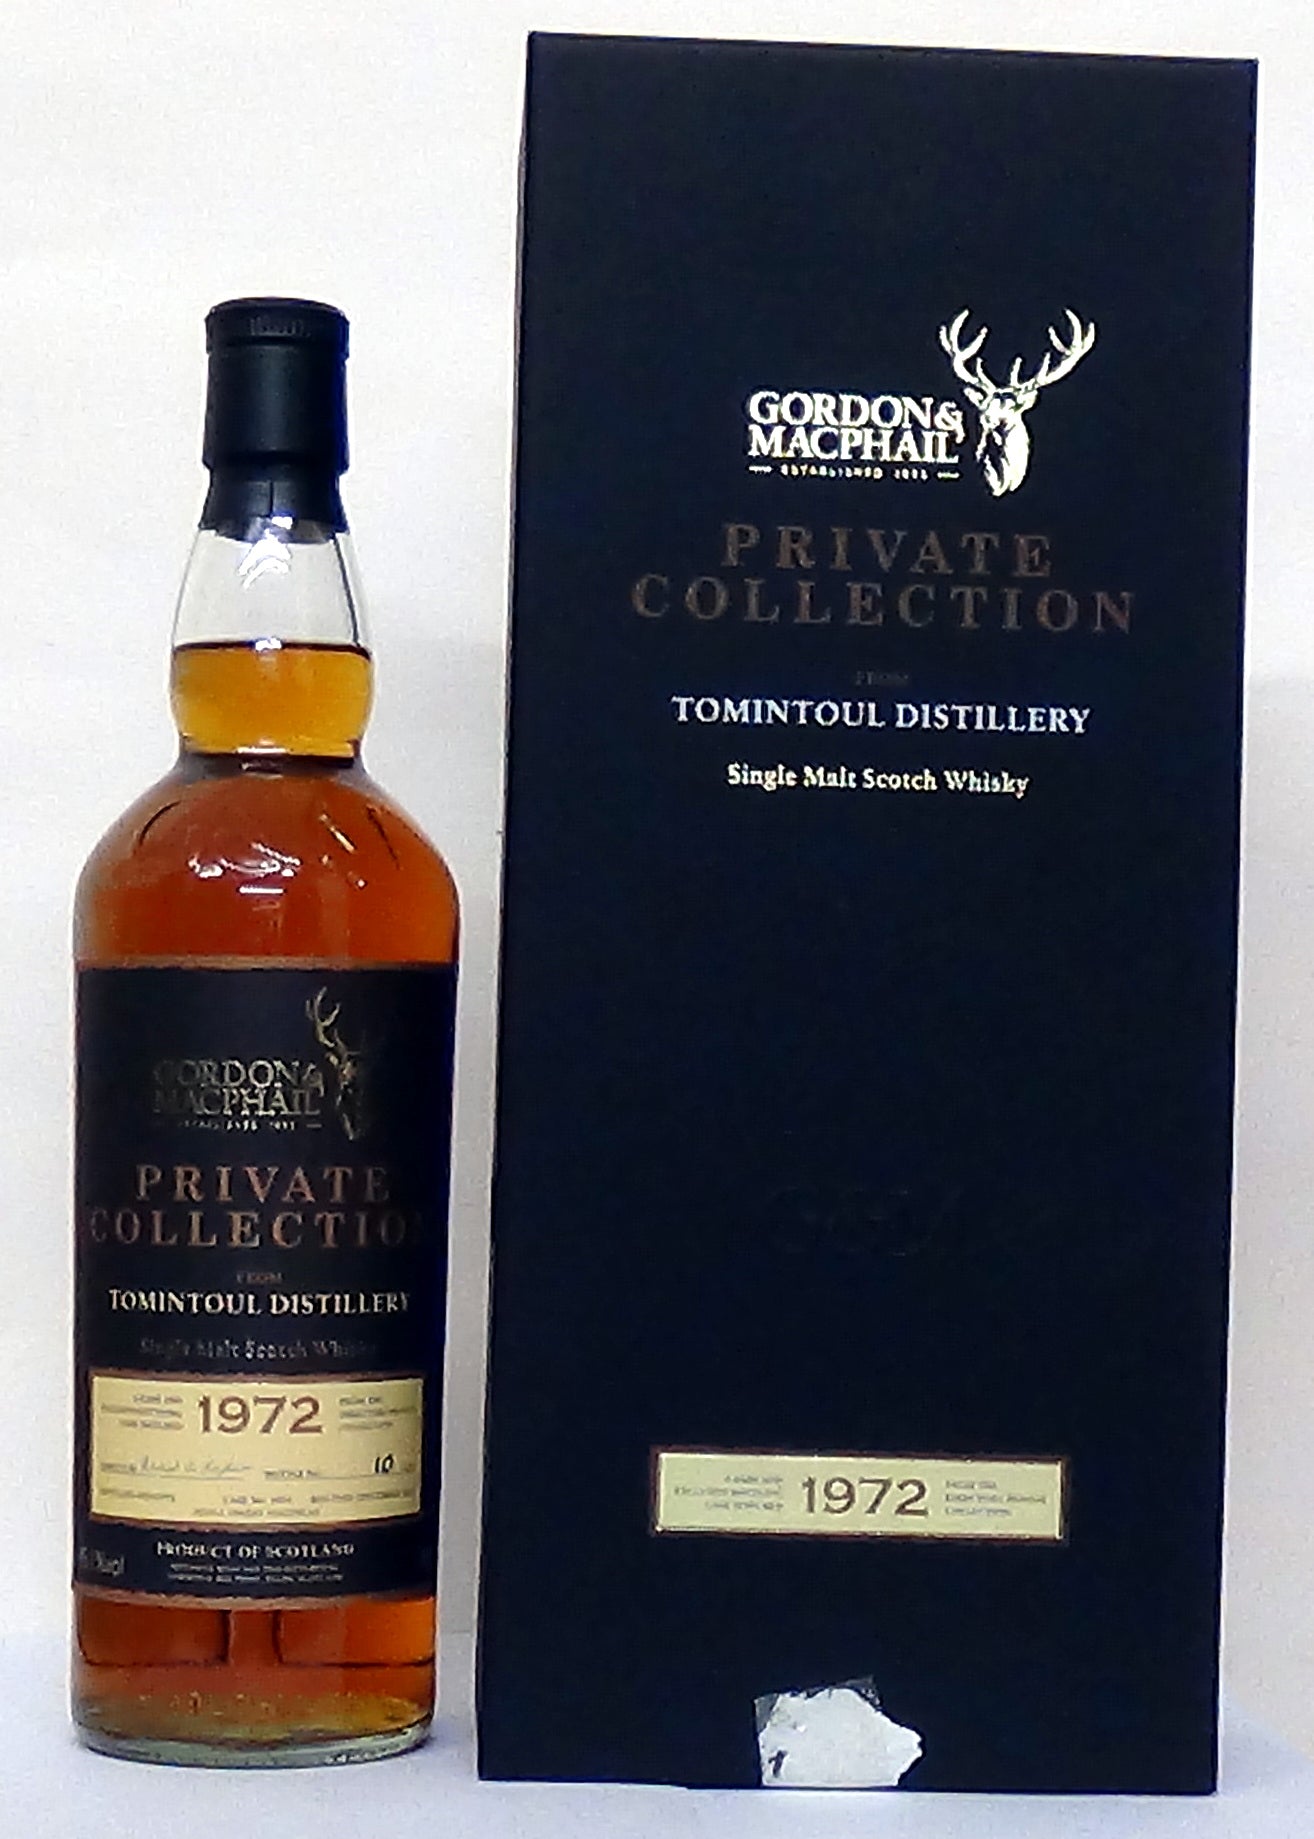 Tomintoul Gordon & macphail Private Collection Bottled Sept 2012, Refill Sherry Hogshead cask 45.1% Abv